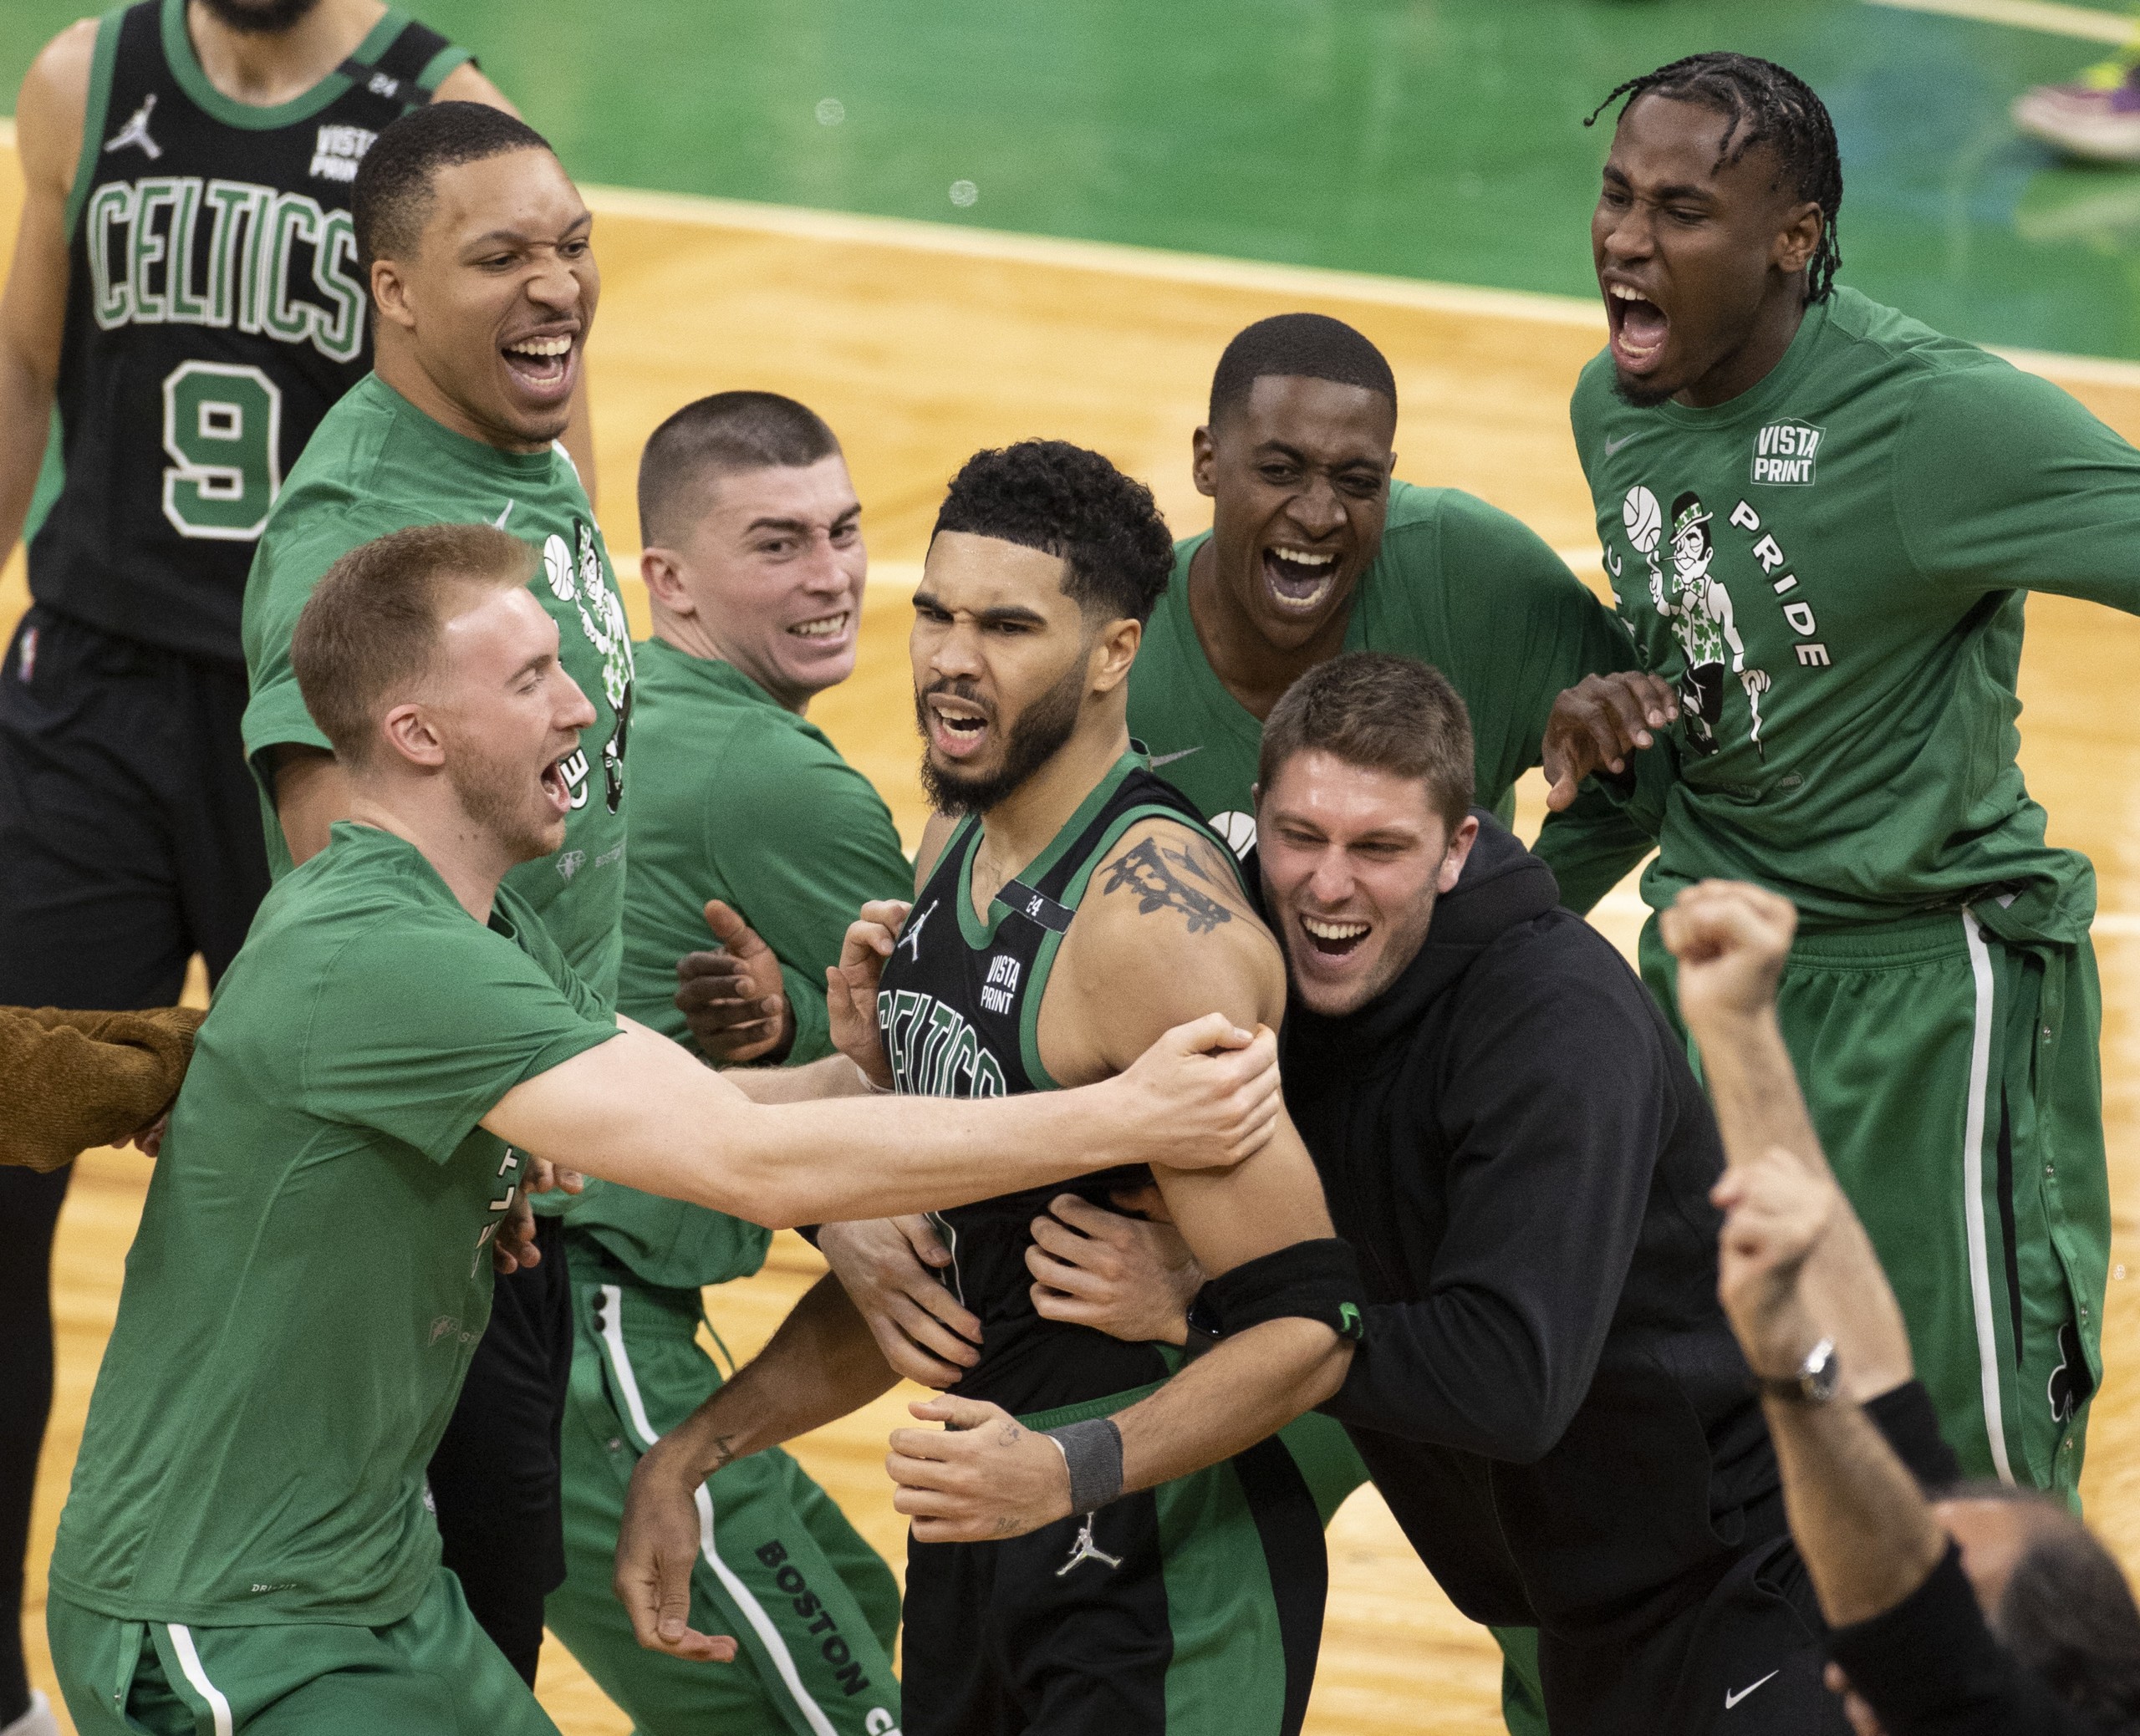 epa09895322 Boston Celtics forward Jayson Tatum (C) is mobbed as he celebrates makinig the winning basket in the final moments of the Eastern Conference First Round playoff game one between the Boston Celtics and the Brooklyn Nets at the TD Garden in Boston, Massachusetts, USA, 17 April 2022. The Boston Celtics lead the best of seven series 1-0.  EPA/CJ GUNTHER  SHUTTERSTOCK OUT